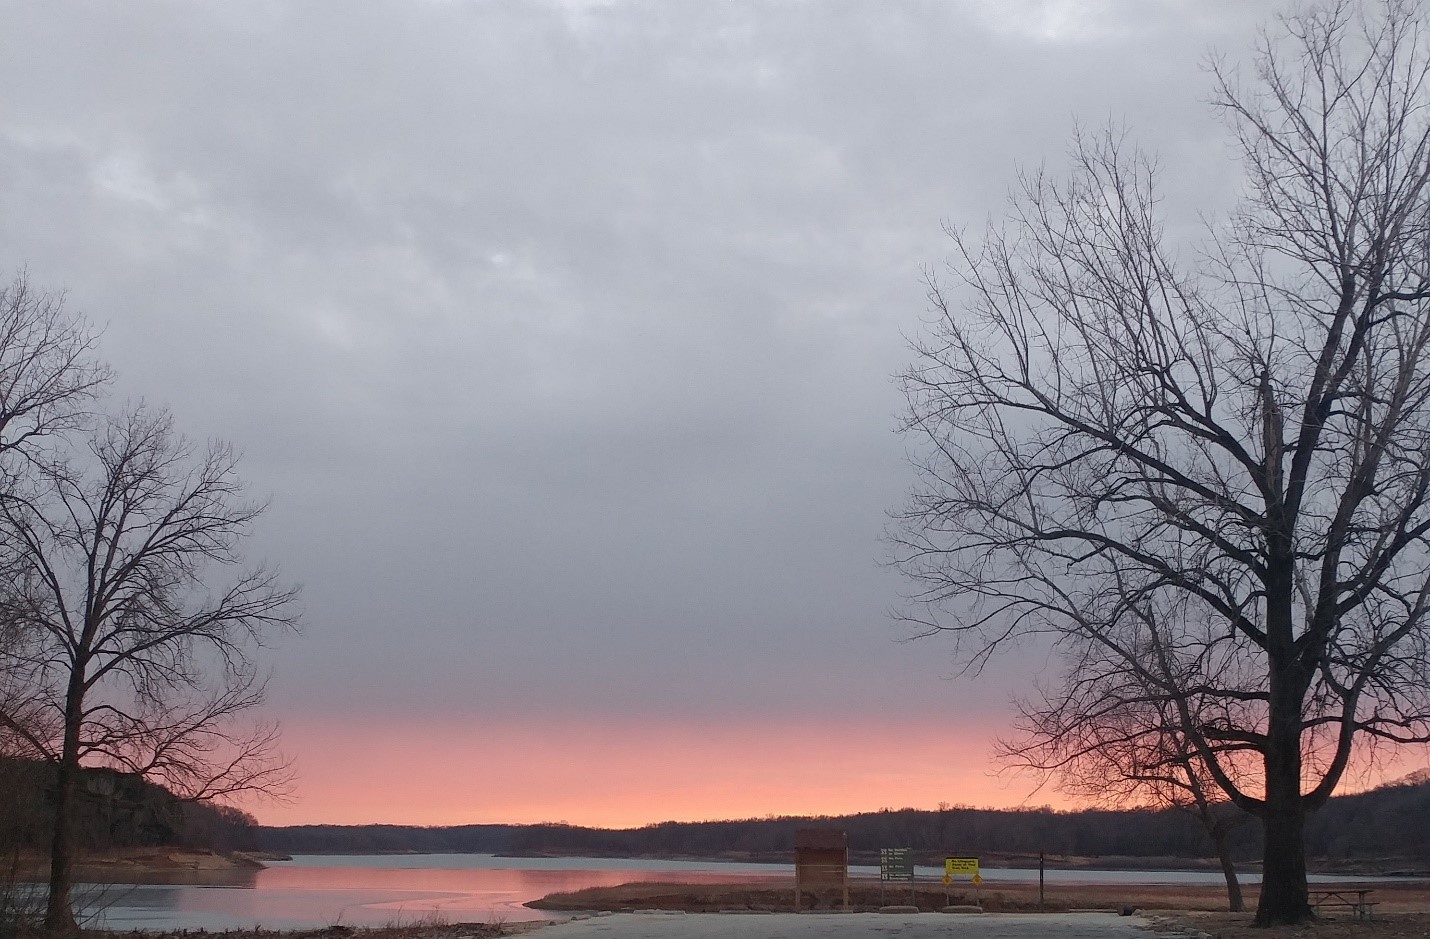 Image of the Coralville Lake at sunset.